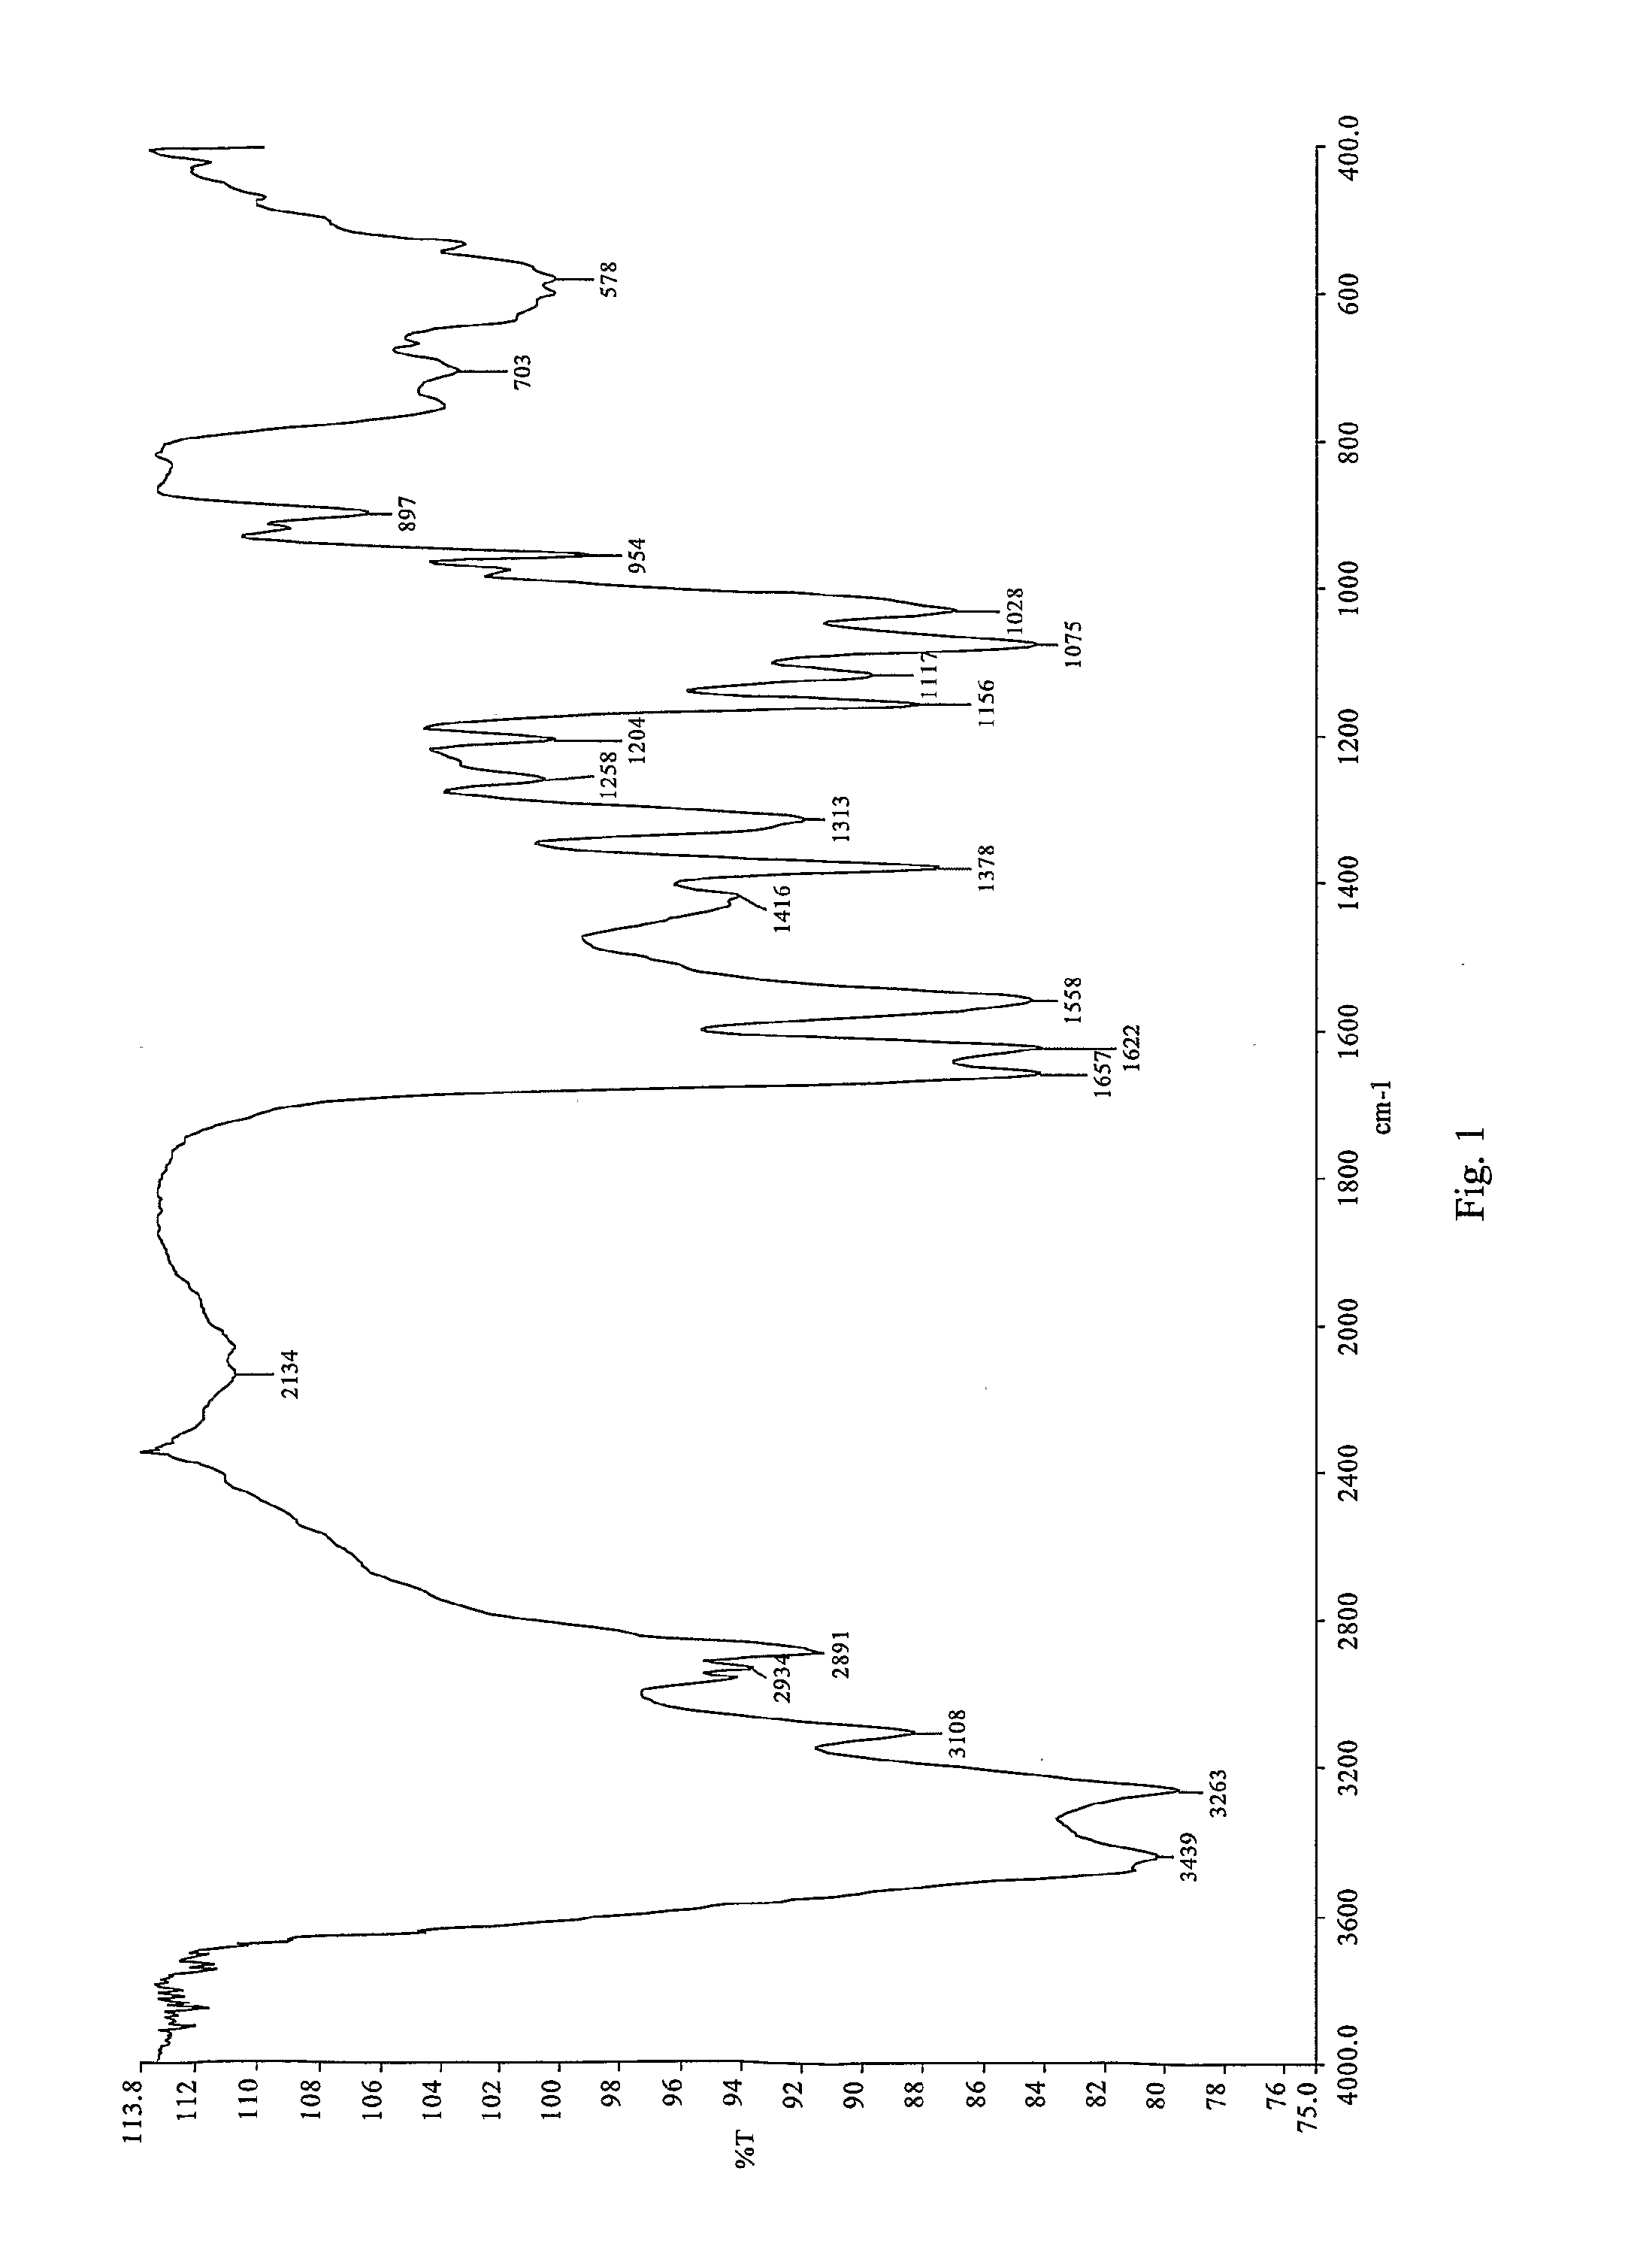 Spray-dried chitin nanofibrils, method for production and uses thereof